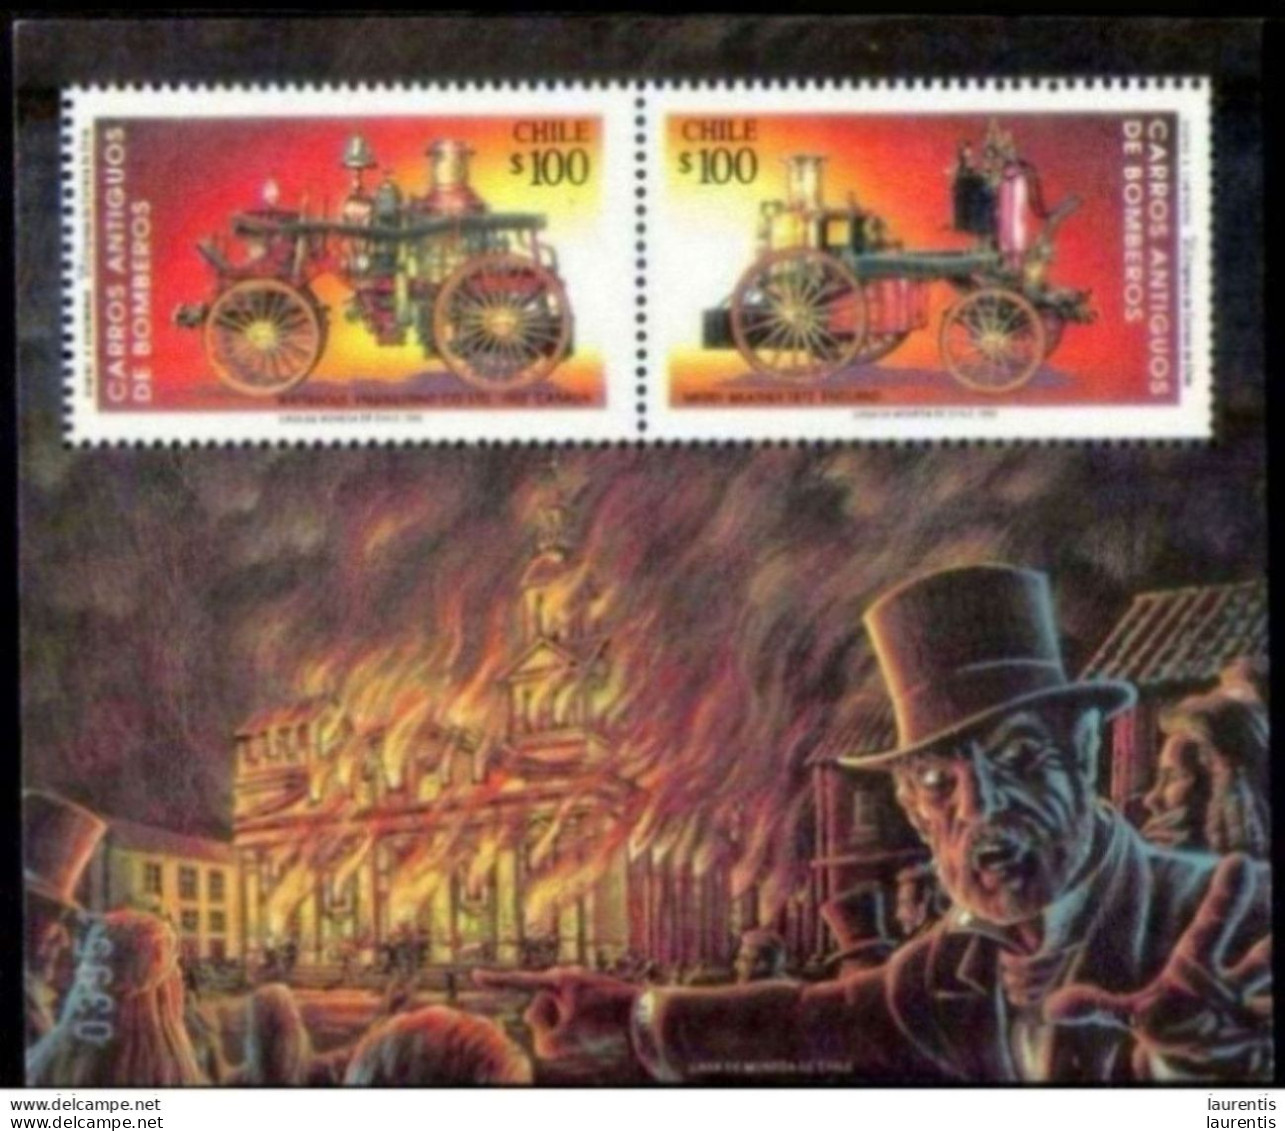 2607  Firemen - Pompiers - Chile BF Yv 44  - MNH - 1,65  (5) - Feuerwehr